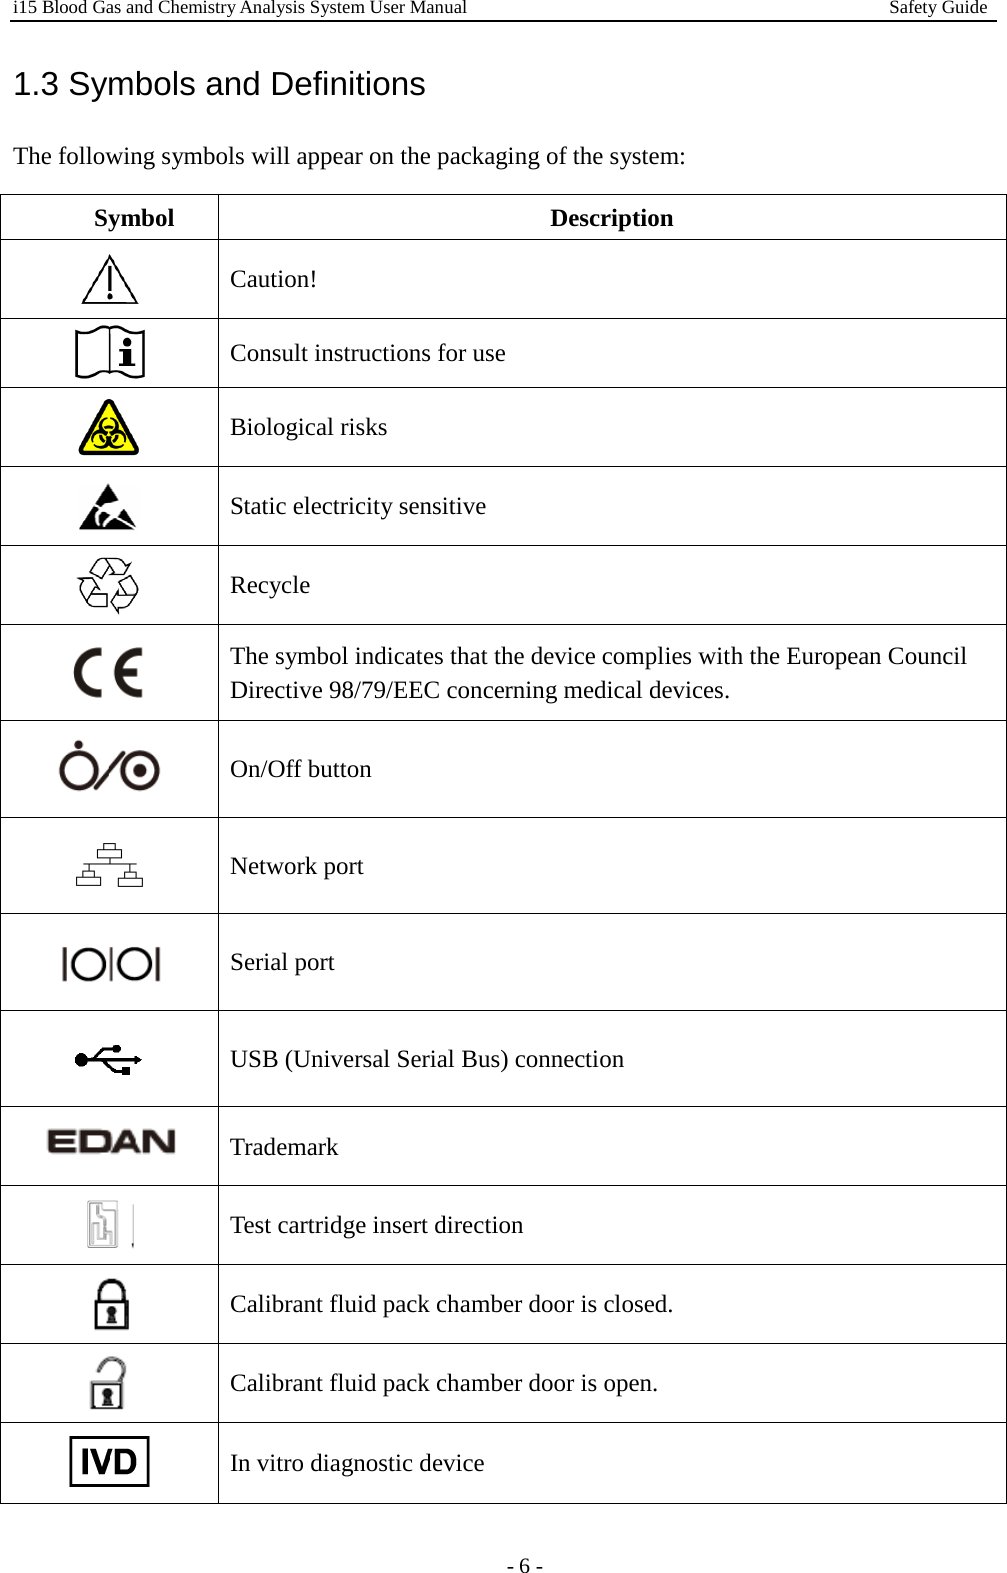 i15 Blood Gas and Chemistry Analysis System User Manual                                             Safety Guide - 6 - 1.3 Symbols and Definitions The following symbols will appear on the packaging of the system: Symbol  Description  Caution!  Consult instructions for use  Biological risks  Static electricity sensitive  Recycle  The symbol indicates that the device complies with the European Council Directive 98/79/EEC concerning medical devices.  On/Off button  Network port  Serial port  USB (Universal Serial Bus) connection  Trademark  Test cartridge insert direction  Calibrant fluid pack chamber door is closed.  Calibrant fluid pack chamber door is open.  In vitro diagnostic device 